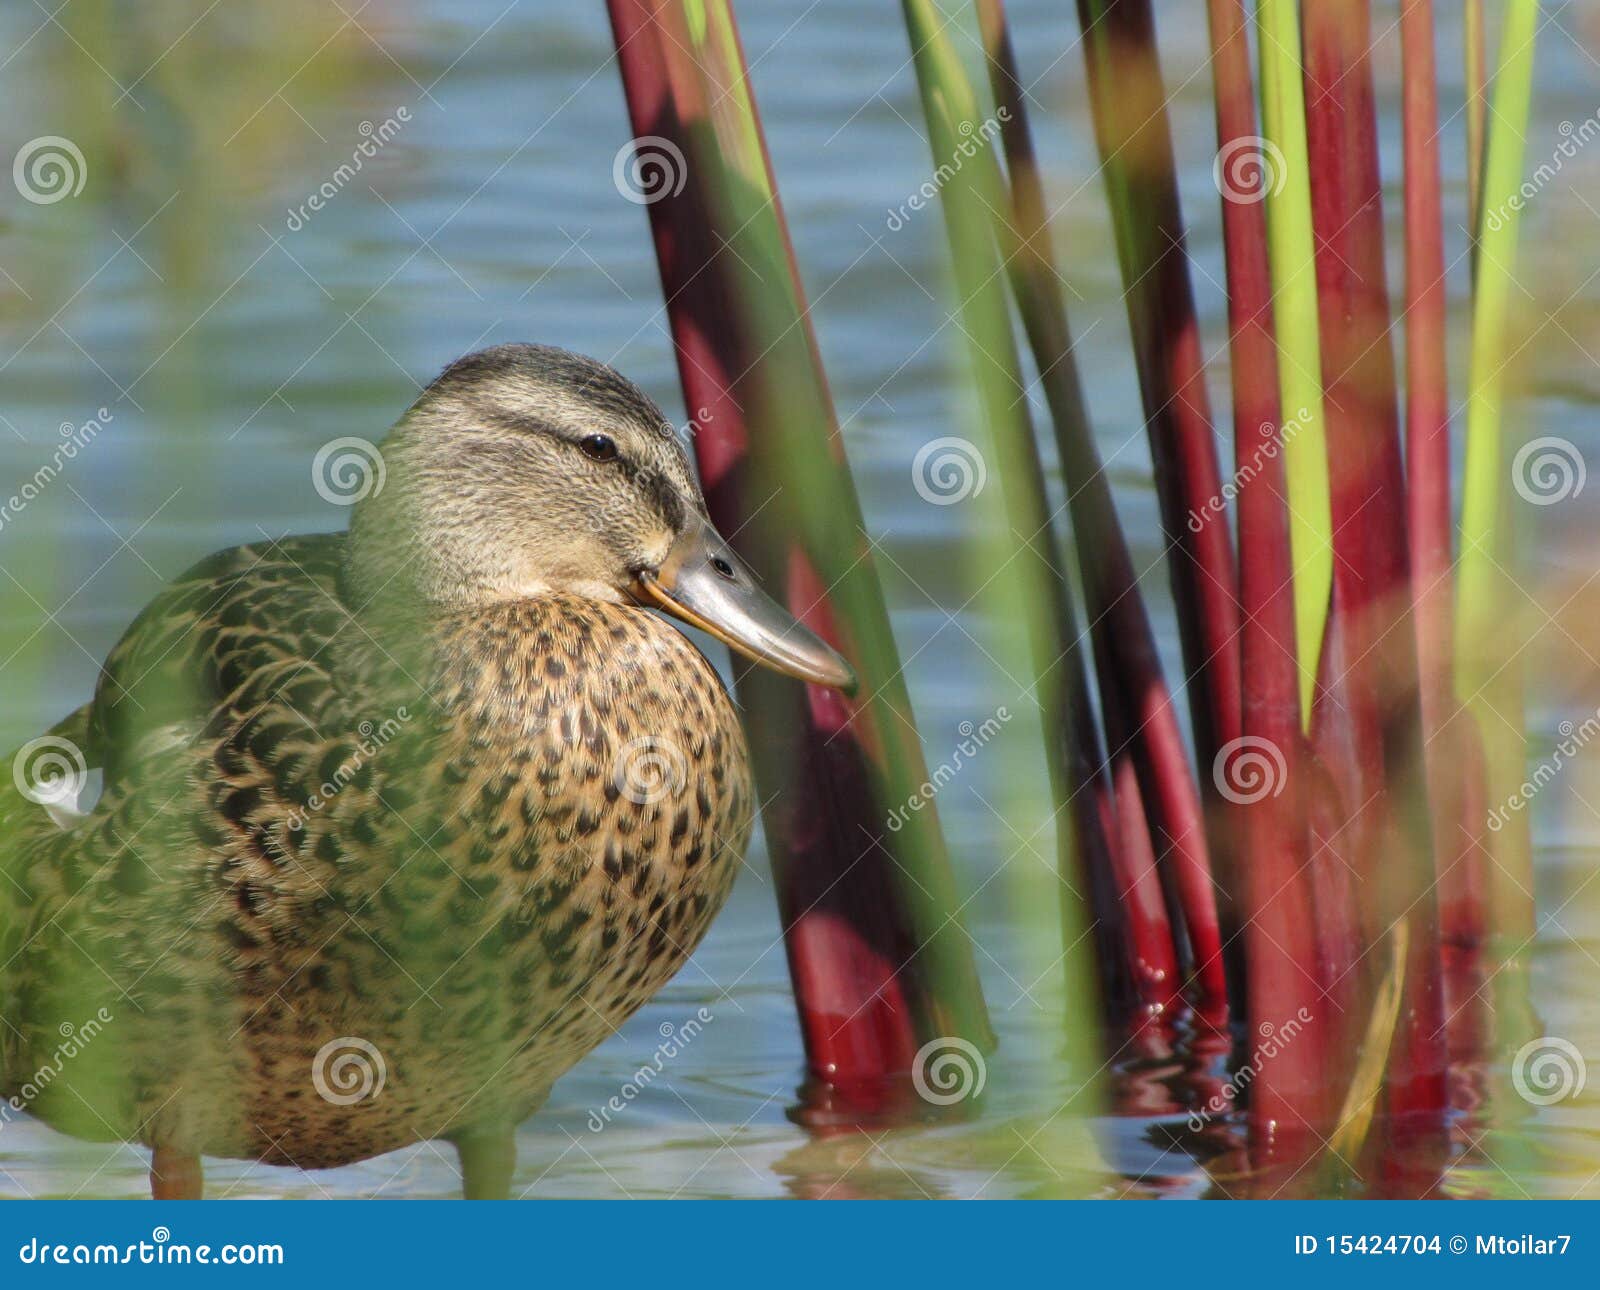 duck among the reeds